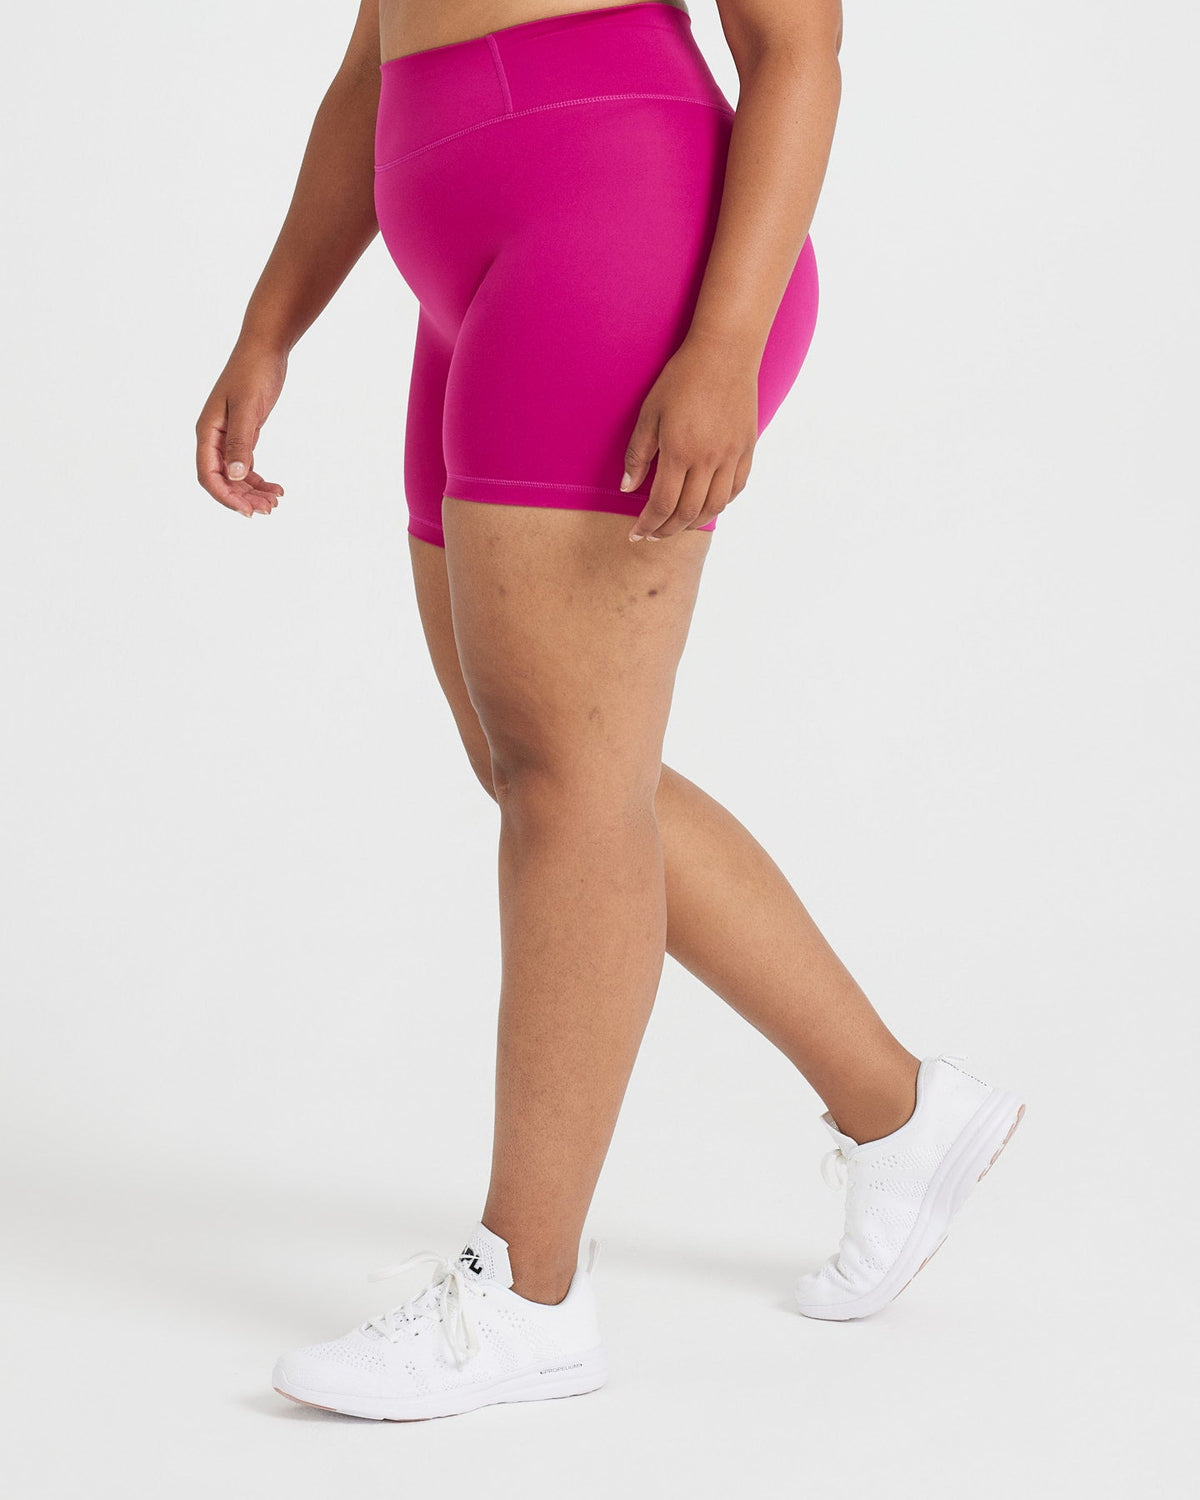 High Waisted Quick Dry Shorts - Fuchsia - Women's | Oner Active US